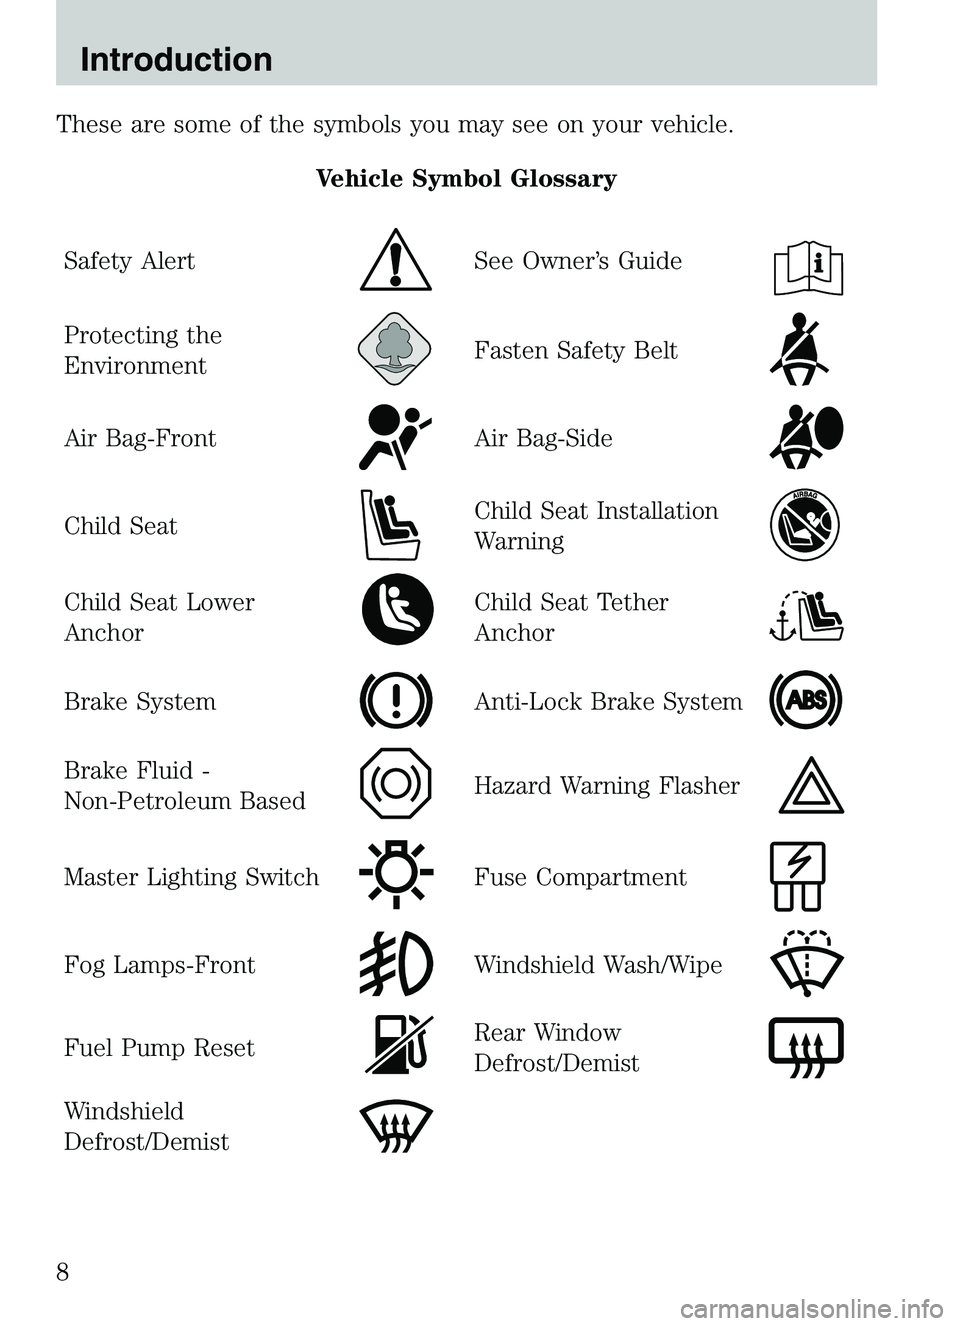 MAZDA MODEL B4000 2003  Owners Manual These are some of the symbols you may see on your vehicle.Vehicle Symbol Glossary
Safety Alert
See Owner’s Guide
Protecting the
EnvironmentFasten Safety Belt
Air Bag-FrontAir Bag-Side
Child SeatChil